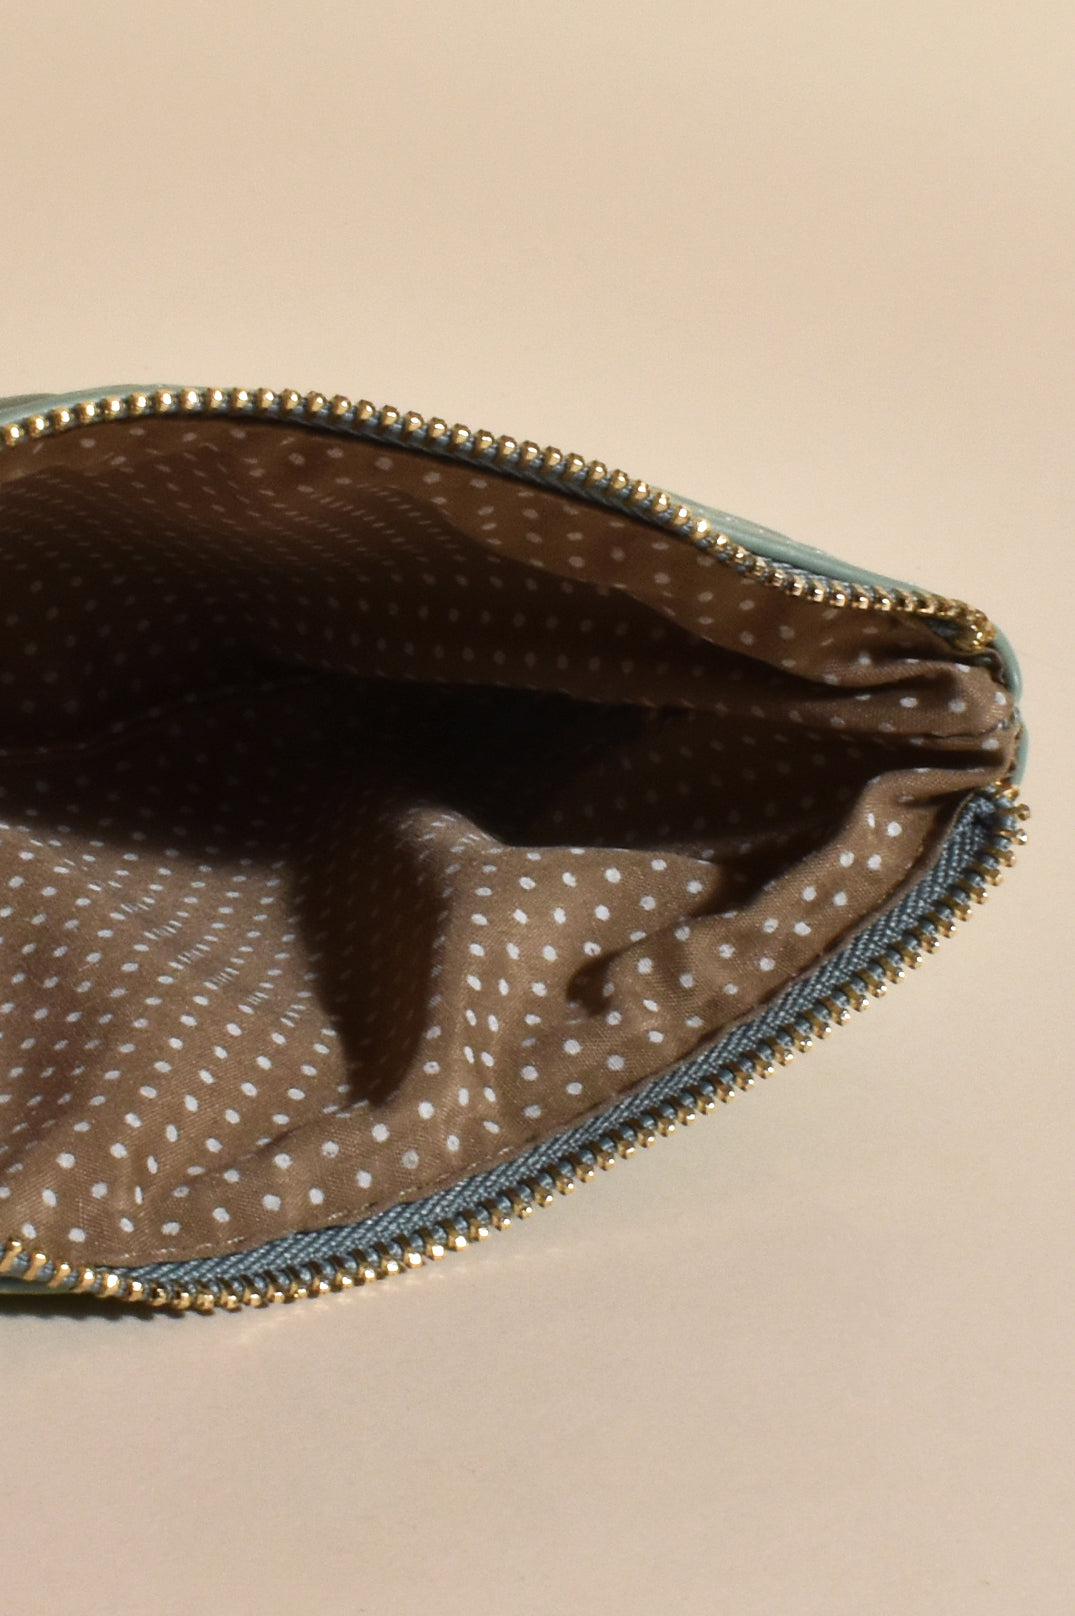 Amara Pleat Design Pouch Bag with Wrist Strap in Tan or Sage.